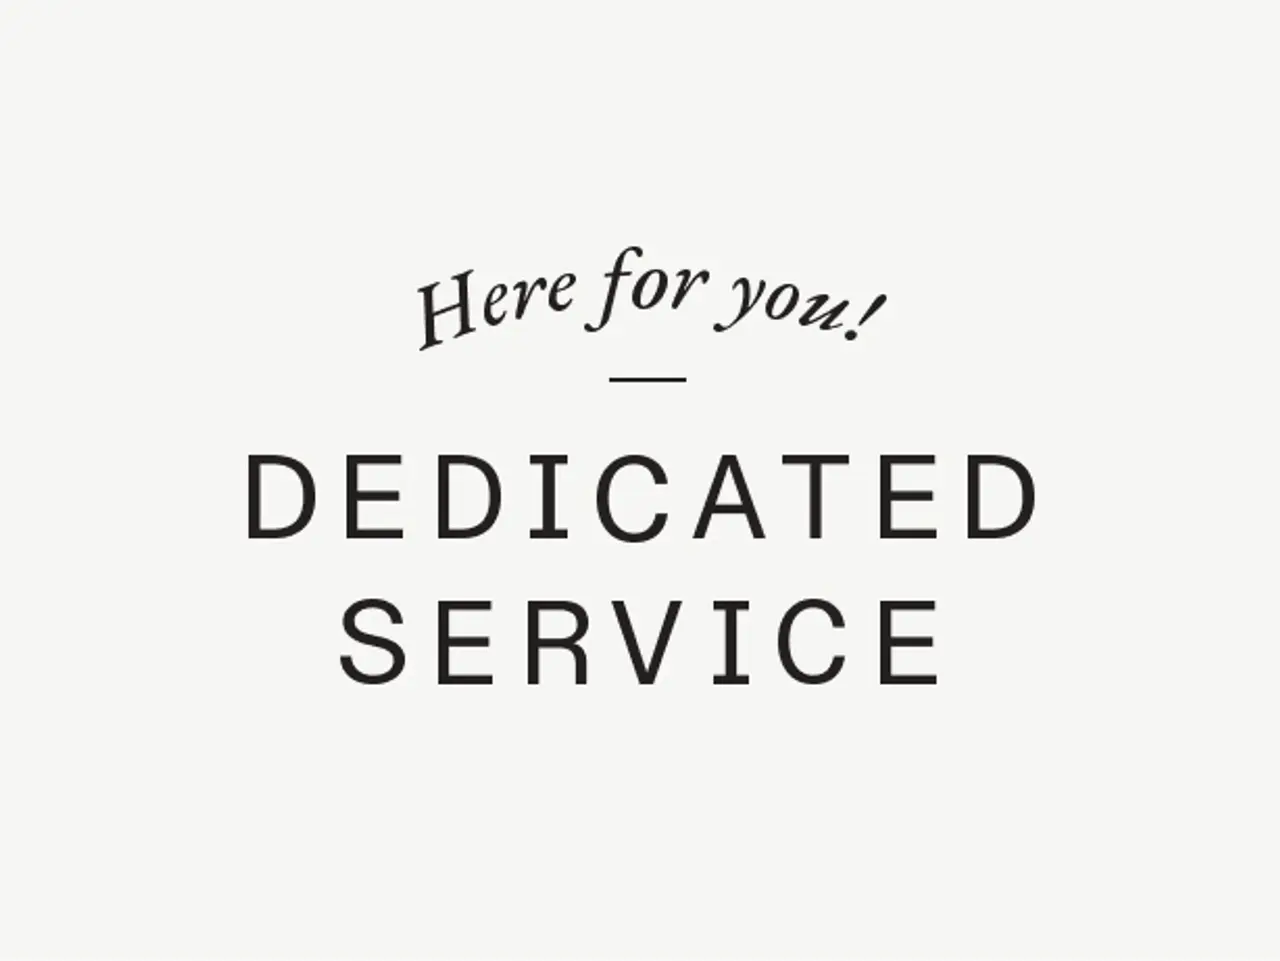 A minimalist image with the text "Here for you! - DEDICATED SERVICE" printed in black on a plain white background.